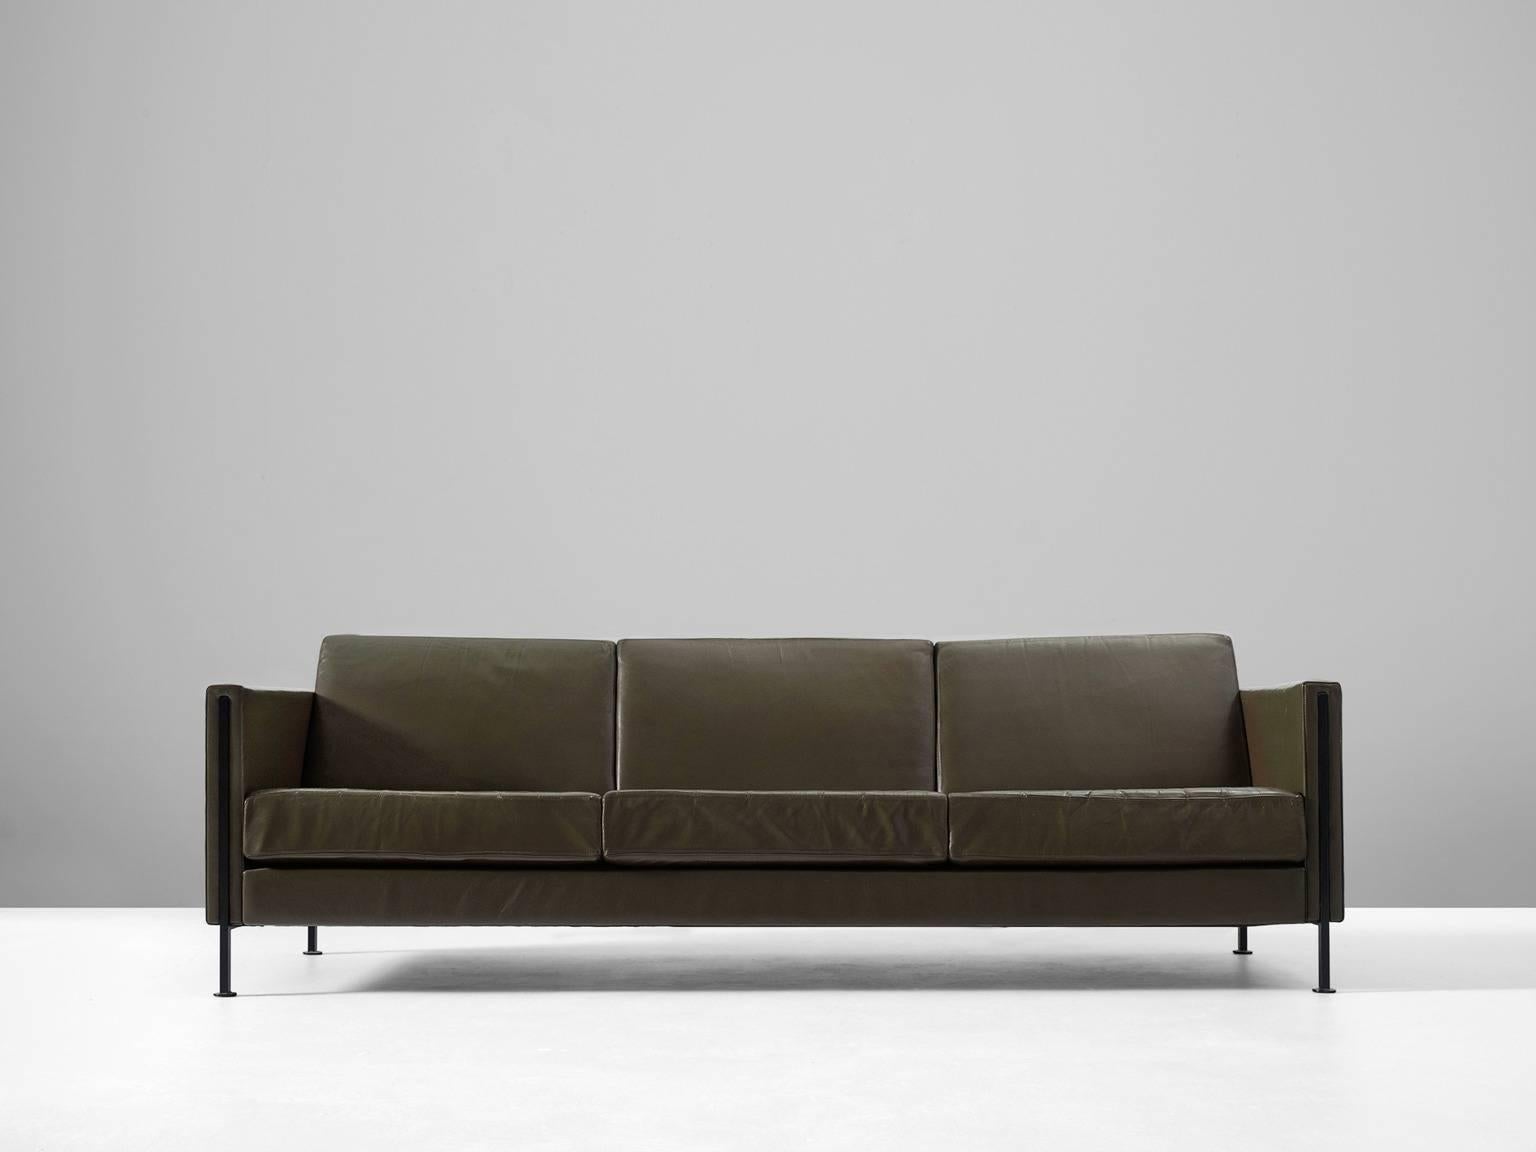 Modern '442/3' sofa's in leather and steel, by Pierre Paulin for Artifort, the Netherlands 1962. 

This comfortable three-seat sofa shows elegant black lacquered steel details. The combination of steel and leather gives this sofa it's modern and